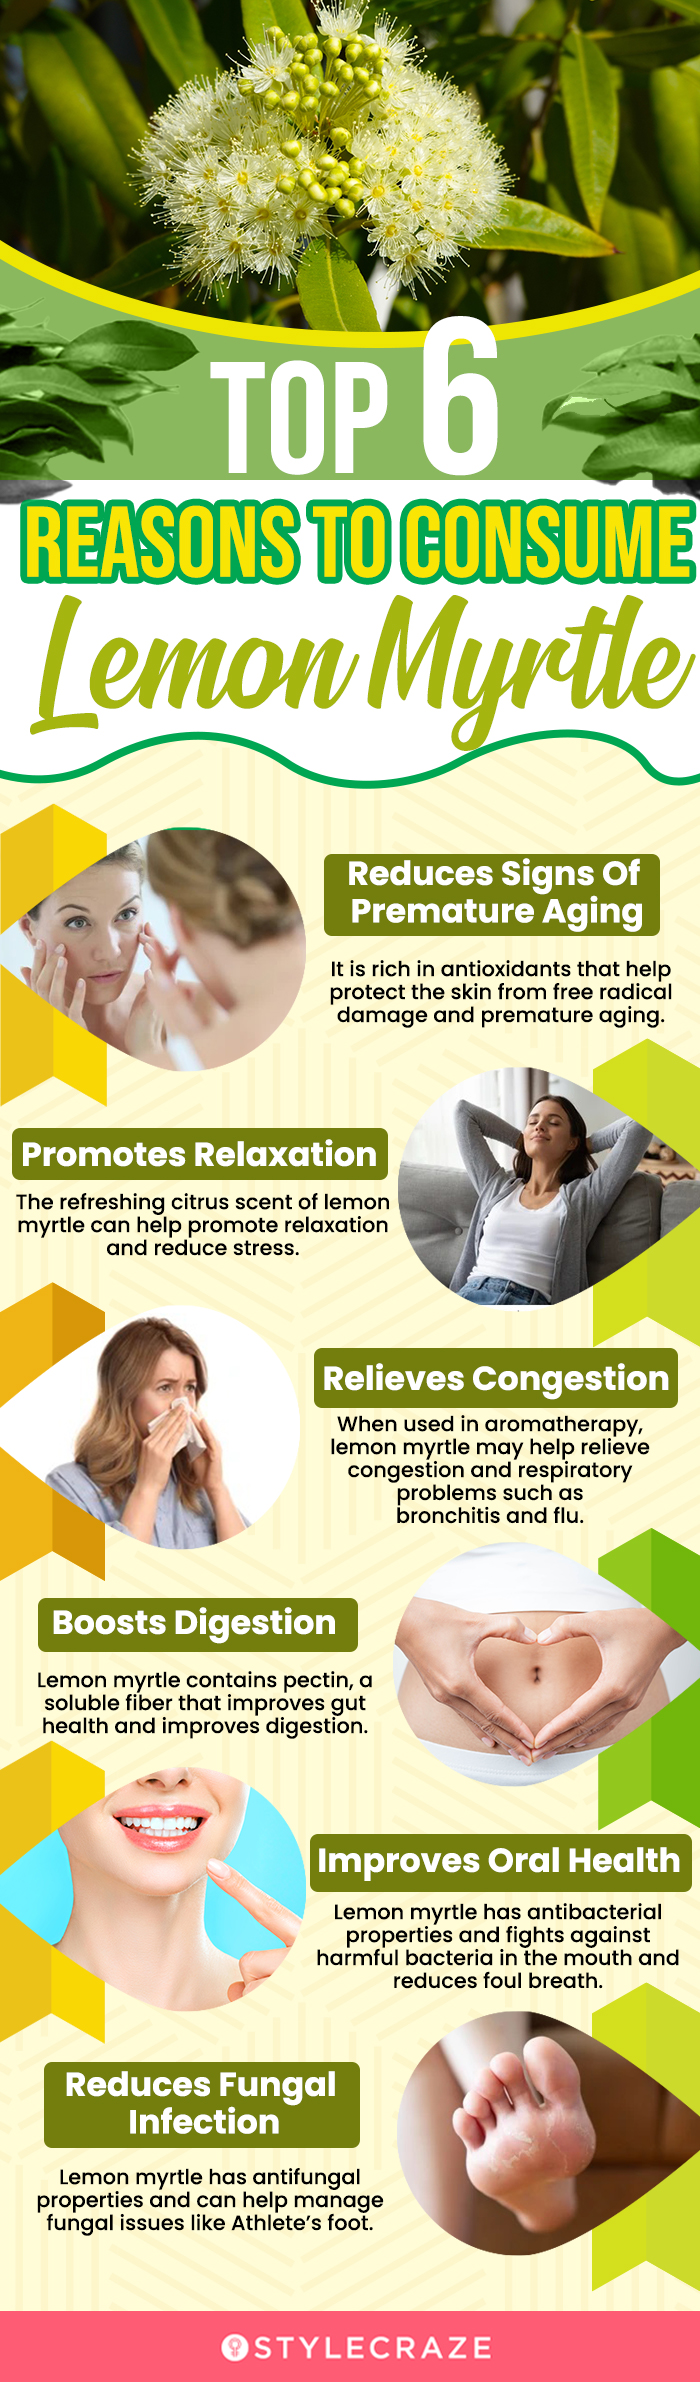 top 6 reasons to consume lemon myrtle (infographic)